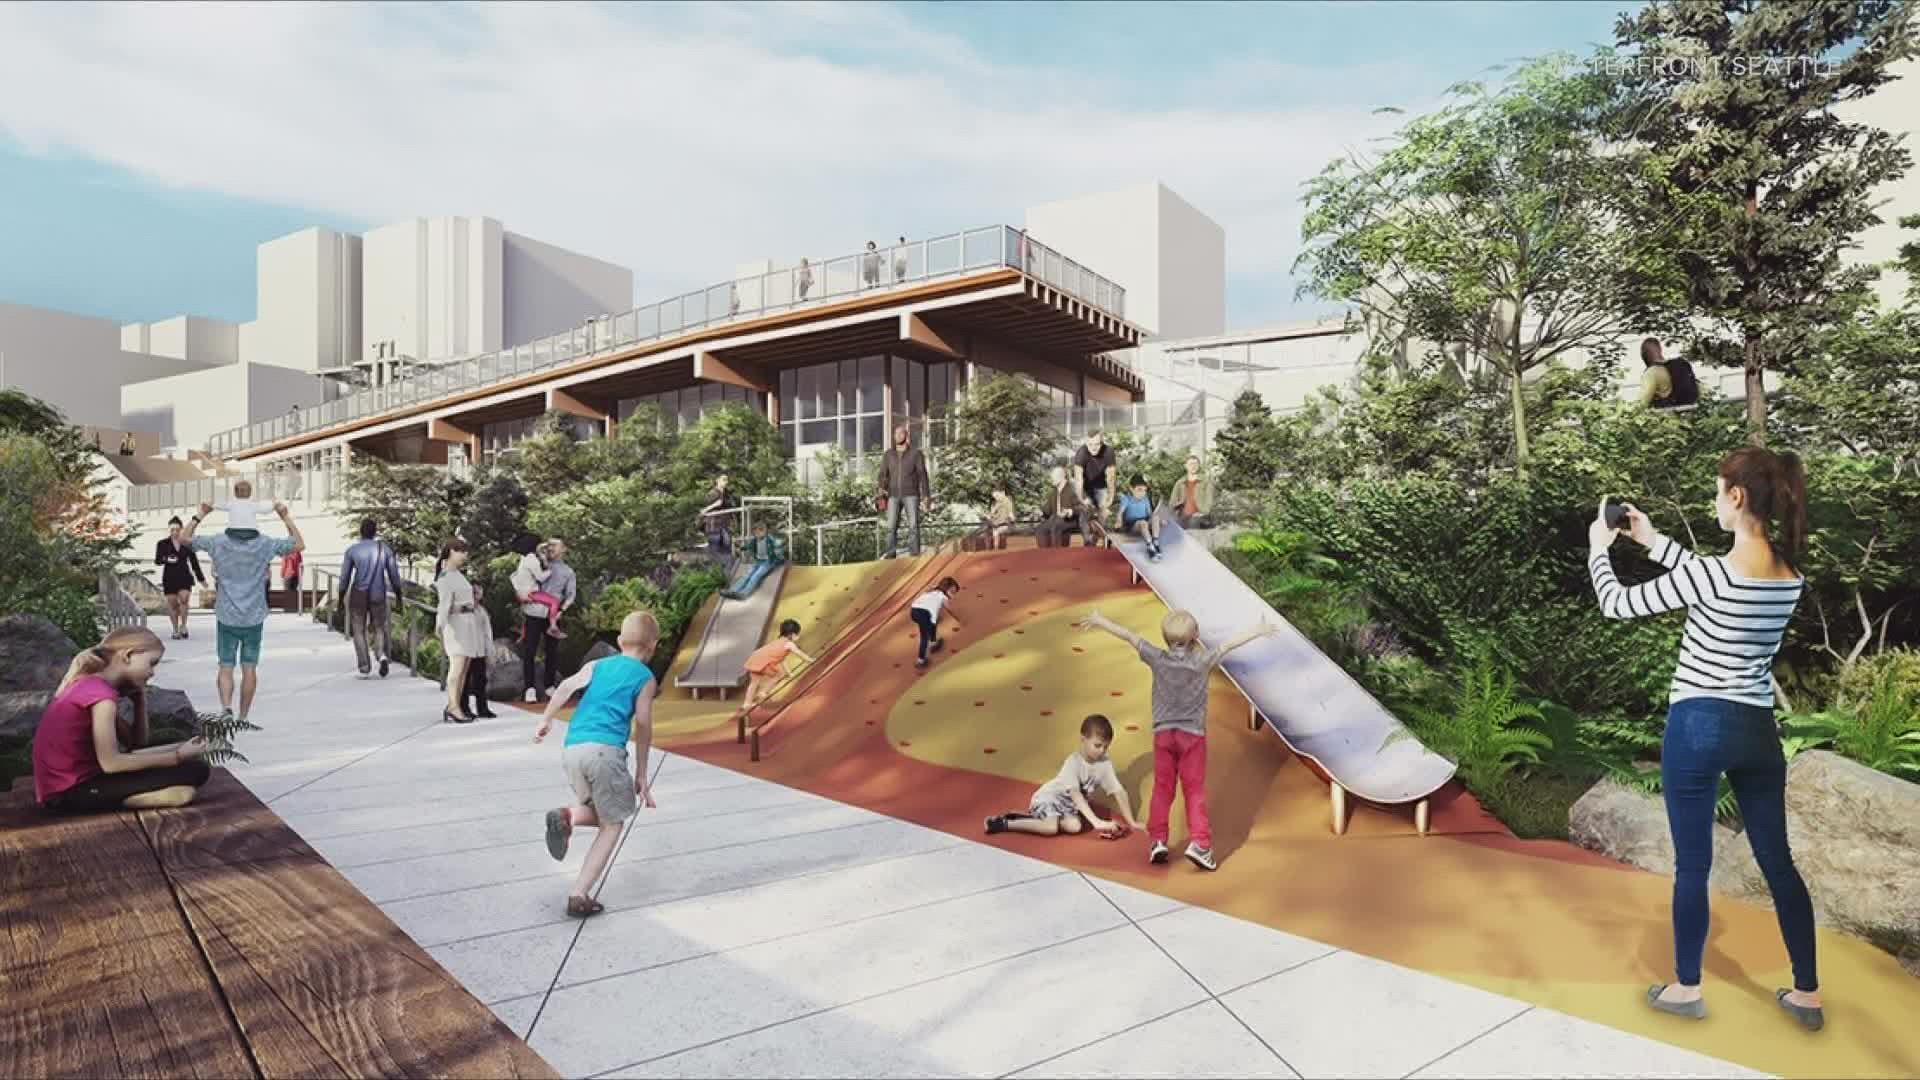 The revamped waterfront will have a new playground, park and event space.  The renovation should be done by 2024.